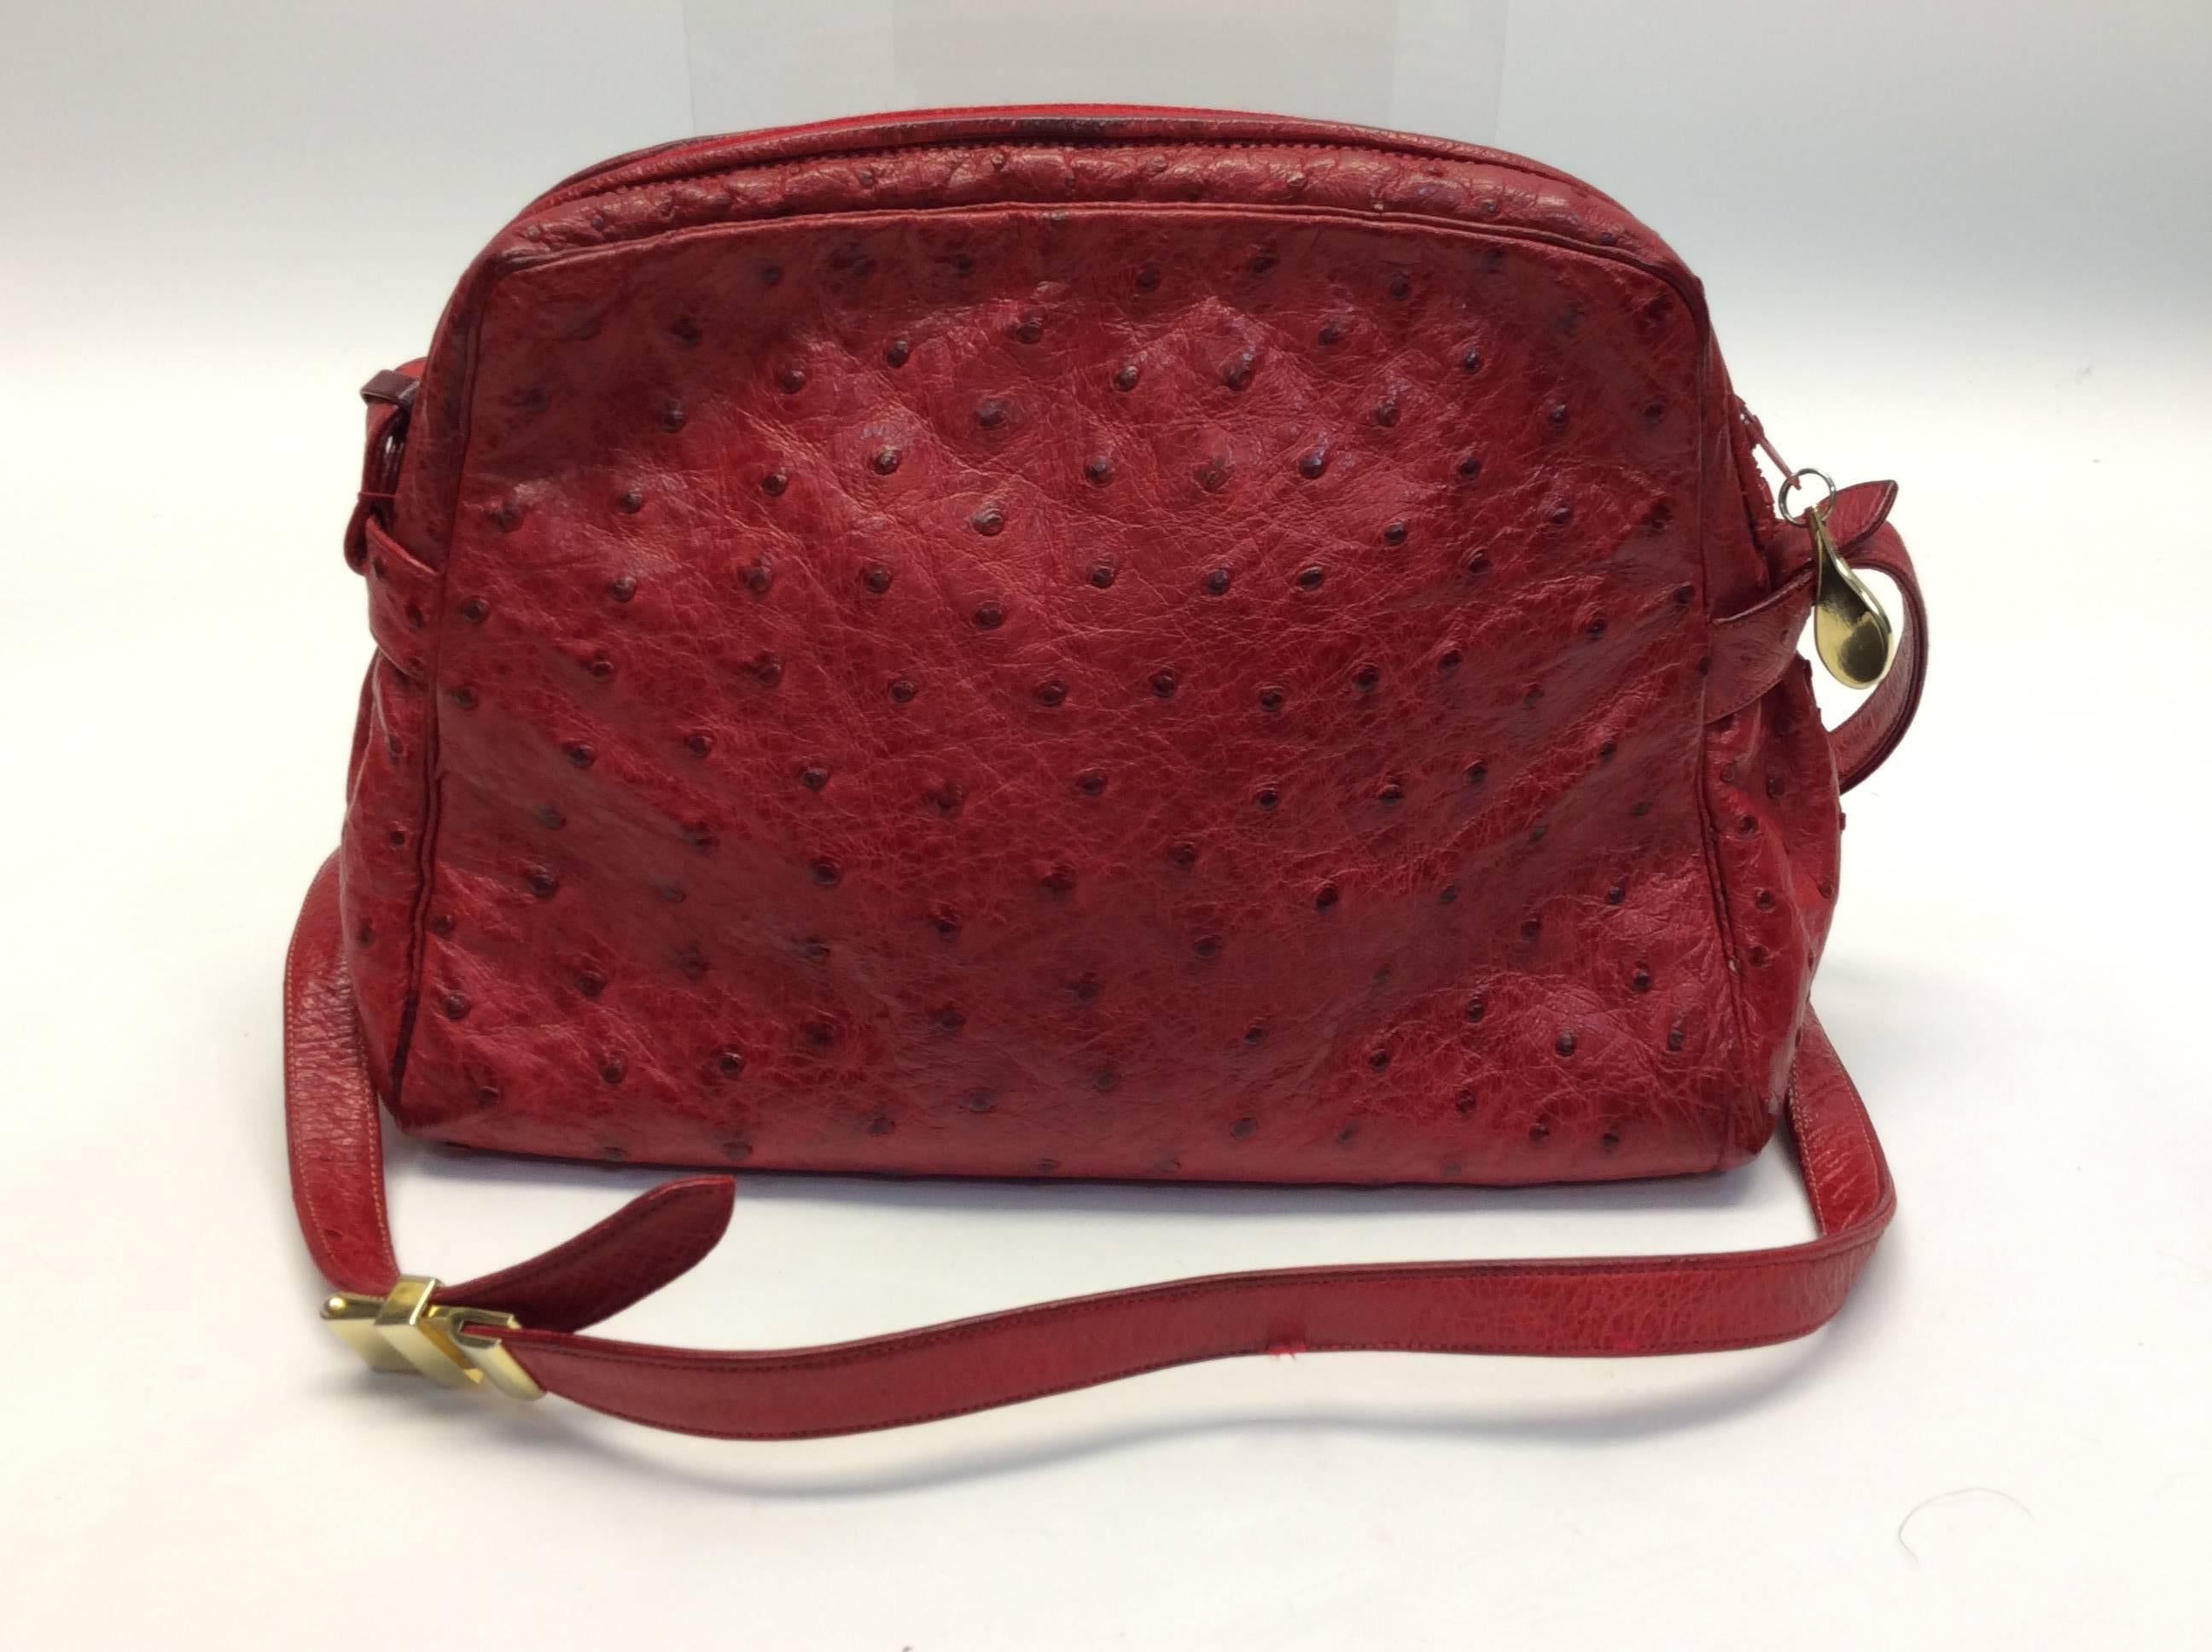 Judith Leiber Red Ostrich Leather Vintage Crossbody In Excellent Condition For Sale In Narberth, PA